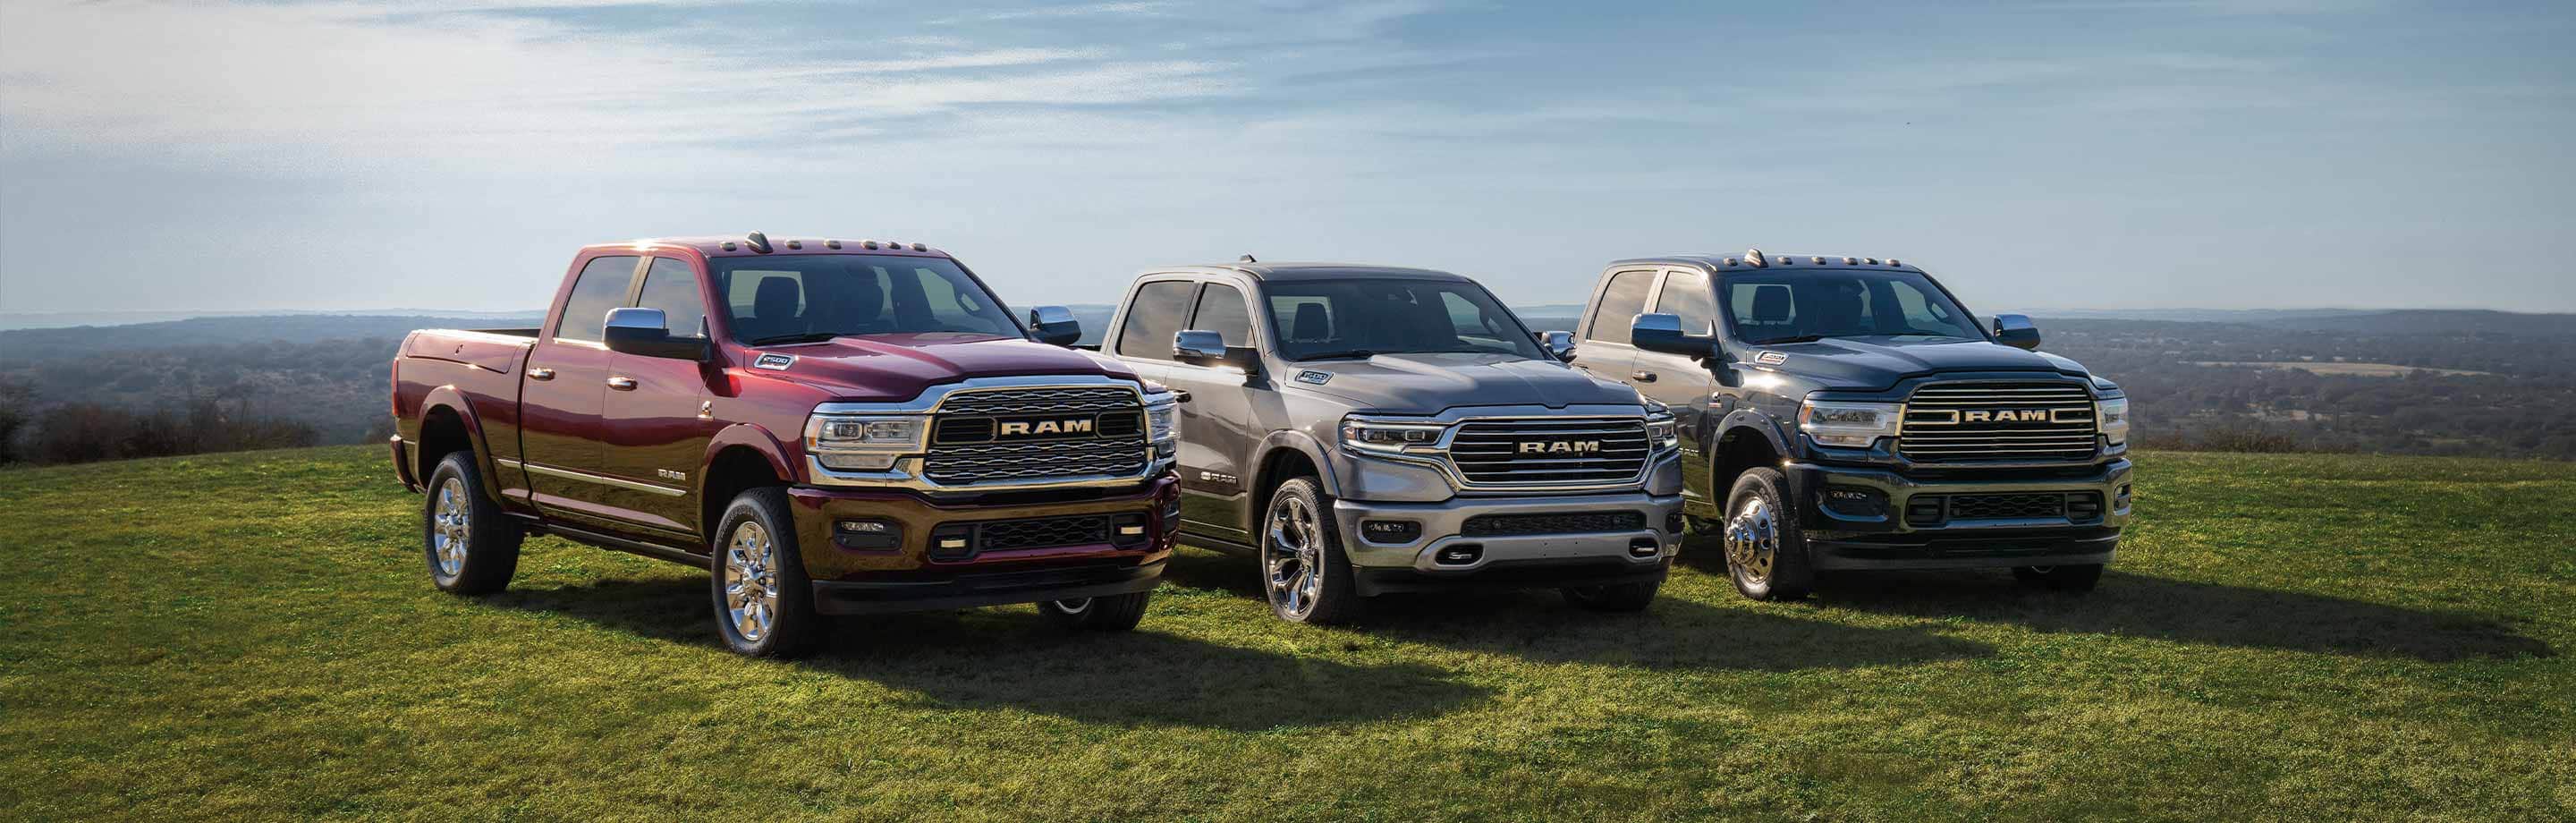 Three 2022 Ram trucks, a 2500 Limited, 1500 Limited Longhorn and 3500 Laramie, parked in an open field.